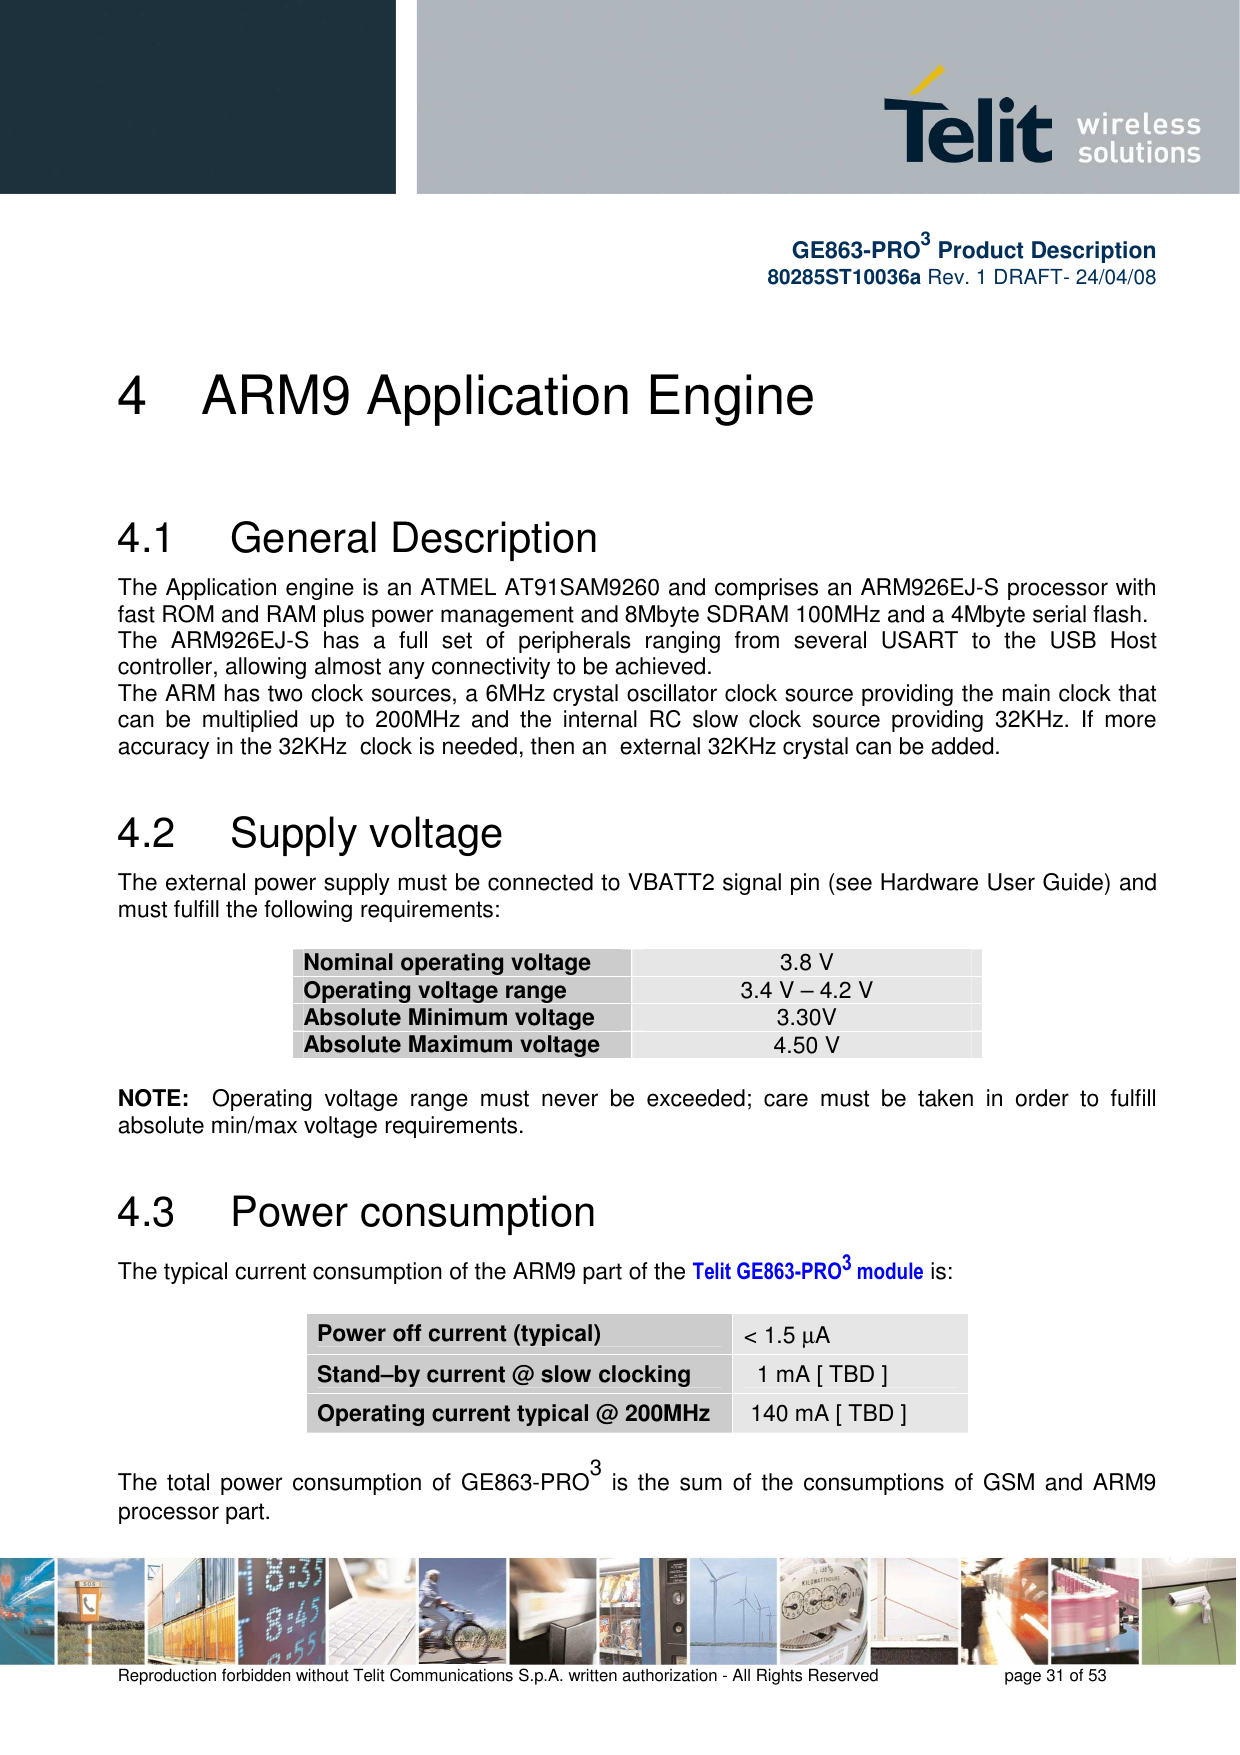       GE863-PRO3 Product Description 80285ST10036a Rev. 1 DRAFT- 24/04/08    Reproduction forbidden without Telit Communications S.p.A. written authorization - All Rights Reserved    page 31 of 53  4  ARM9 Application Engine 4.1   General Description The Application engine is an ATMEL AT91SAM9260 and comprises an ARM926EJ-S processor with fast ROM and RAM plus power management and 8Mbyte SDRAM 100MHz and a 4Mbyte serial flash. The  ARM926EJ-S  has  a  full  set  of  peripherals  ranging  from  several  USART  to  the  USB  Host controller, allowing almost any connectivity to be achieved. The ARM has two clock sources, a 6MHz crystal oscillator clock source providing the main clock that can  be  multiplied  up  to  200MHz  and  the  internal  RC  slow  clock  source  providing  32KHz.  If  more accuracy in the 32KHz  clock is needed, then an  external 32KHz crystal can be added. 4.2   Supply voltage The external power supply must be connected to VBATT2 signal pin (see Hardware User Guide) and must fulfill the following requirements:   Nominal operating voltage  3.8 V Operating voltage range  3.4 V – 4.2 V Absolute Minimum voltage  3.30V Absolute Maximum voltage  4.50 V  NOTE:    Operating  voltage  range  must  never  be  exceeded;  care  must  be  taken  in  order  to  fulfill absolute min/max voltage requirements. 4.3   Power consumption The typical current consumption of the ARM9 part of the Telit GE863-PRO3 module is:  Power off current (typical)  &lt; 1.5 µA Stand–by current @ slow clocking    1 mA [ TBD ] Operating current typical @ 200MHz   140 mA [ TBD ]  The total  power consumption of  GE863-PRO3 is the  sum of the  consumptions of GSM and ARM9 processor part.  